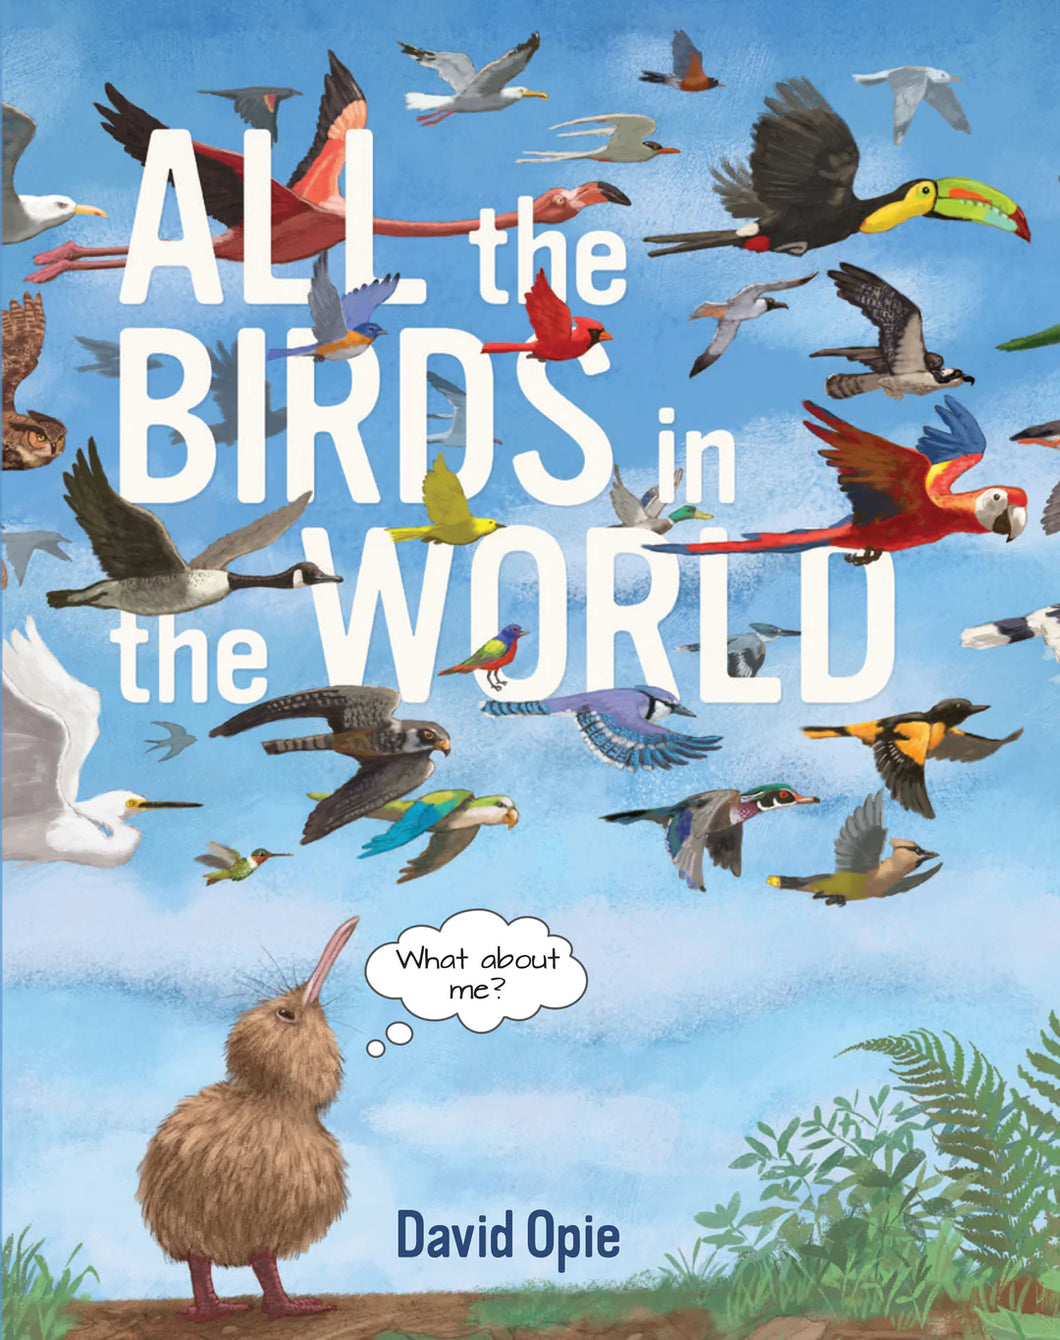 All the Birds in the World Hardcover picture book